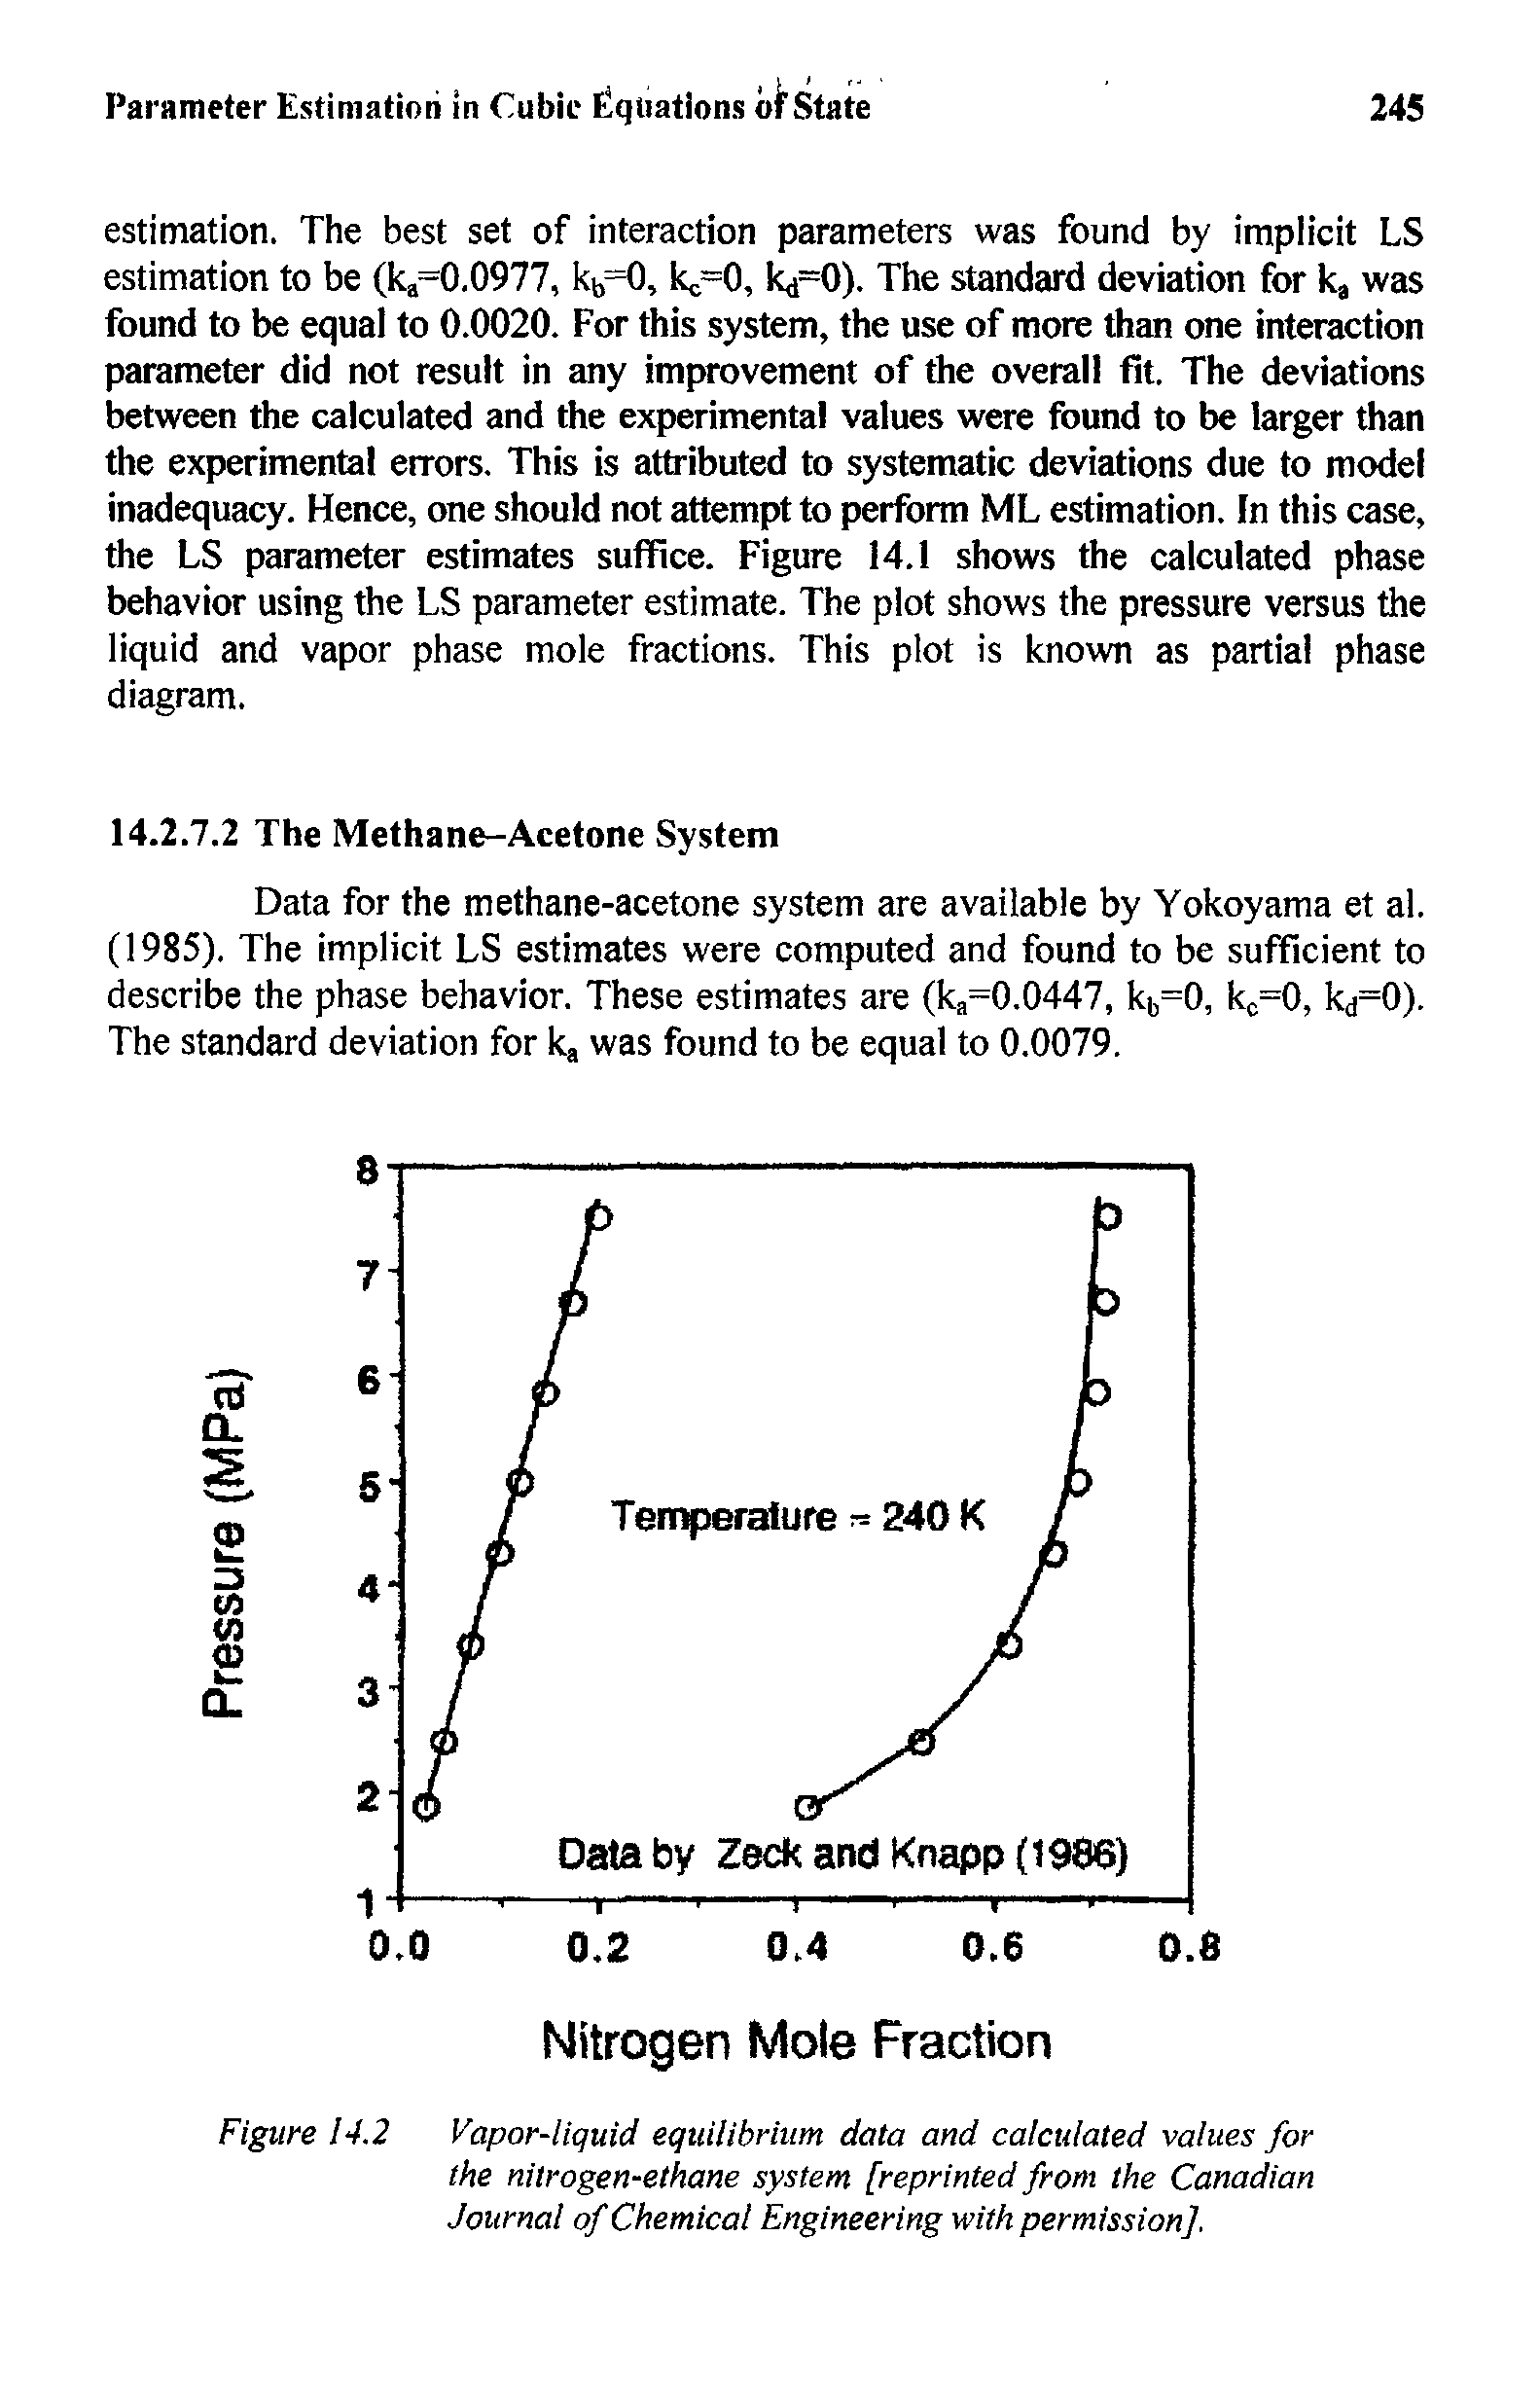 Figure 14.2 Vapor-liquid equilibrium data and calculated values for the nitrogen-ethane system [reprinted from the Canadian Journal of Chemical Engineering with permission].